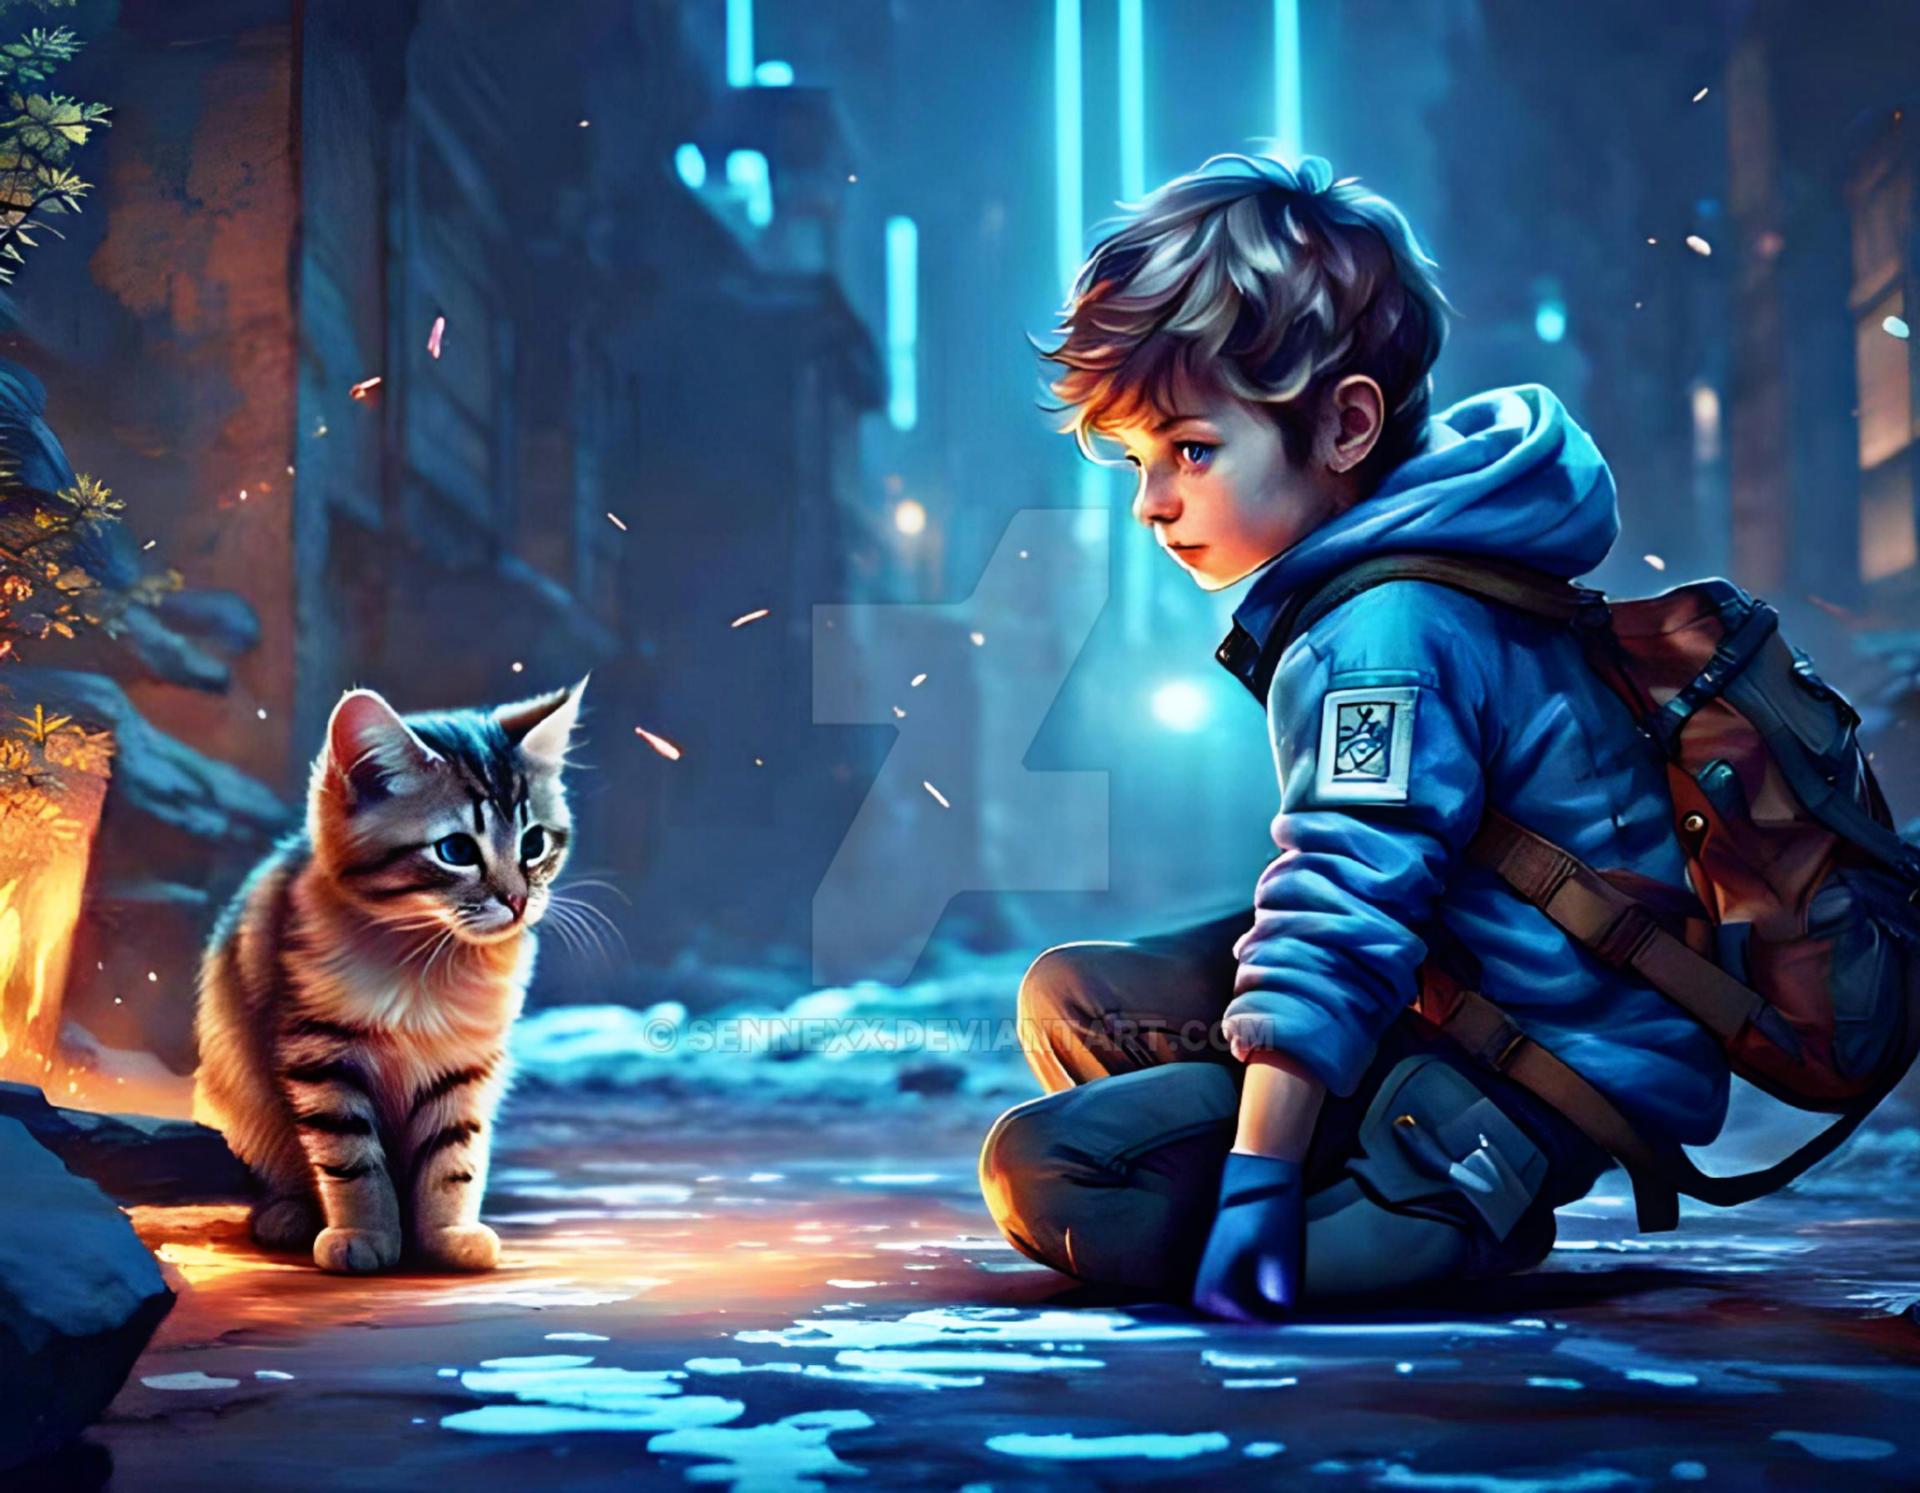 Seen Game Fanart The Boy And Cat By Sennexx